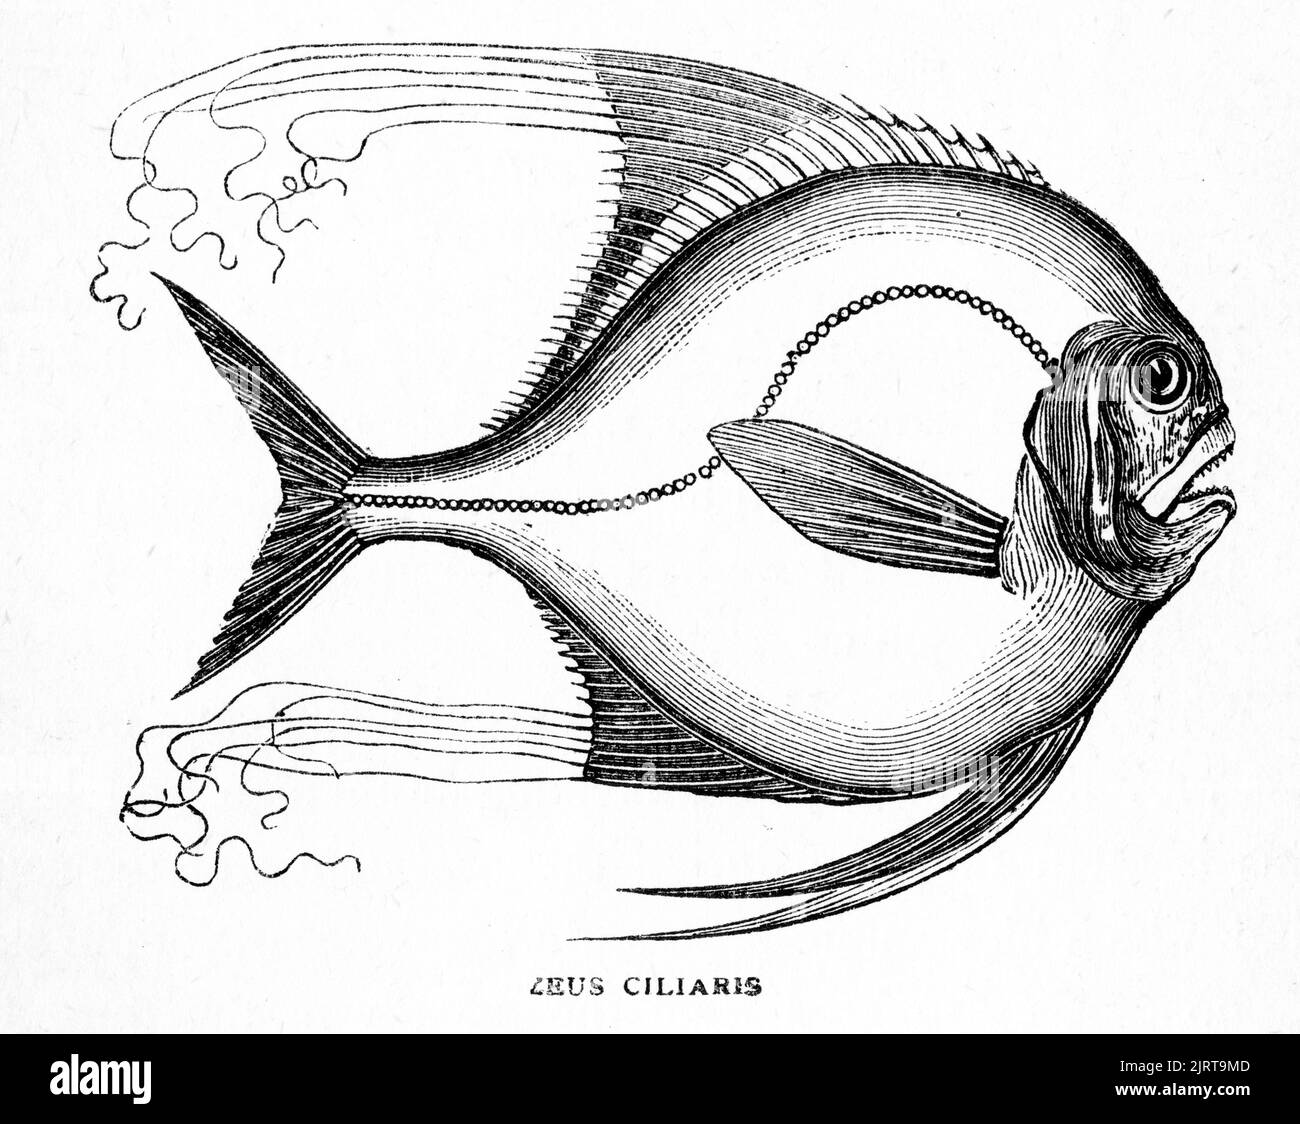 Engraving of the African pompano (Alectis ciliaris), also known as the pennant-fish or threadfin trevally, is a widely distributed species of tropical marine fish in the jack family, Carangidae. Stock Photo